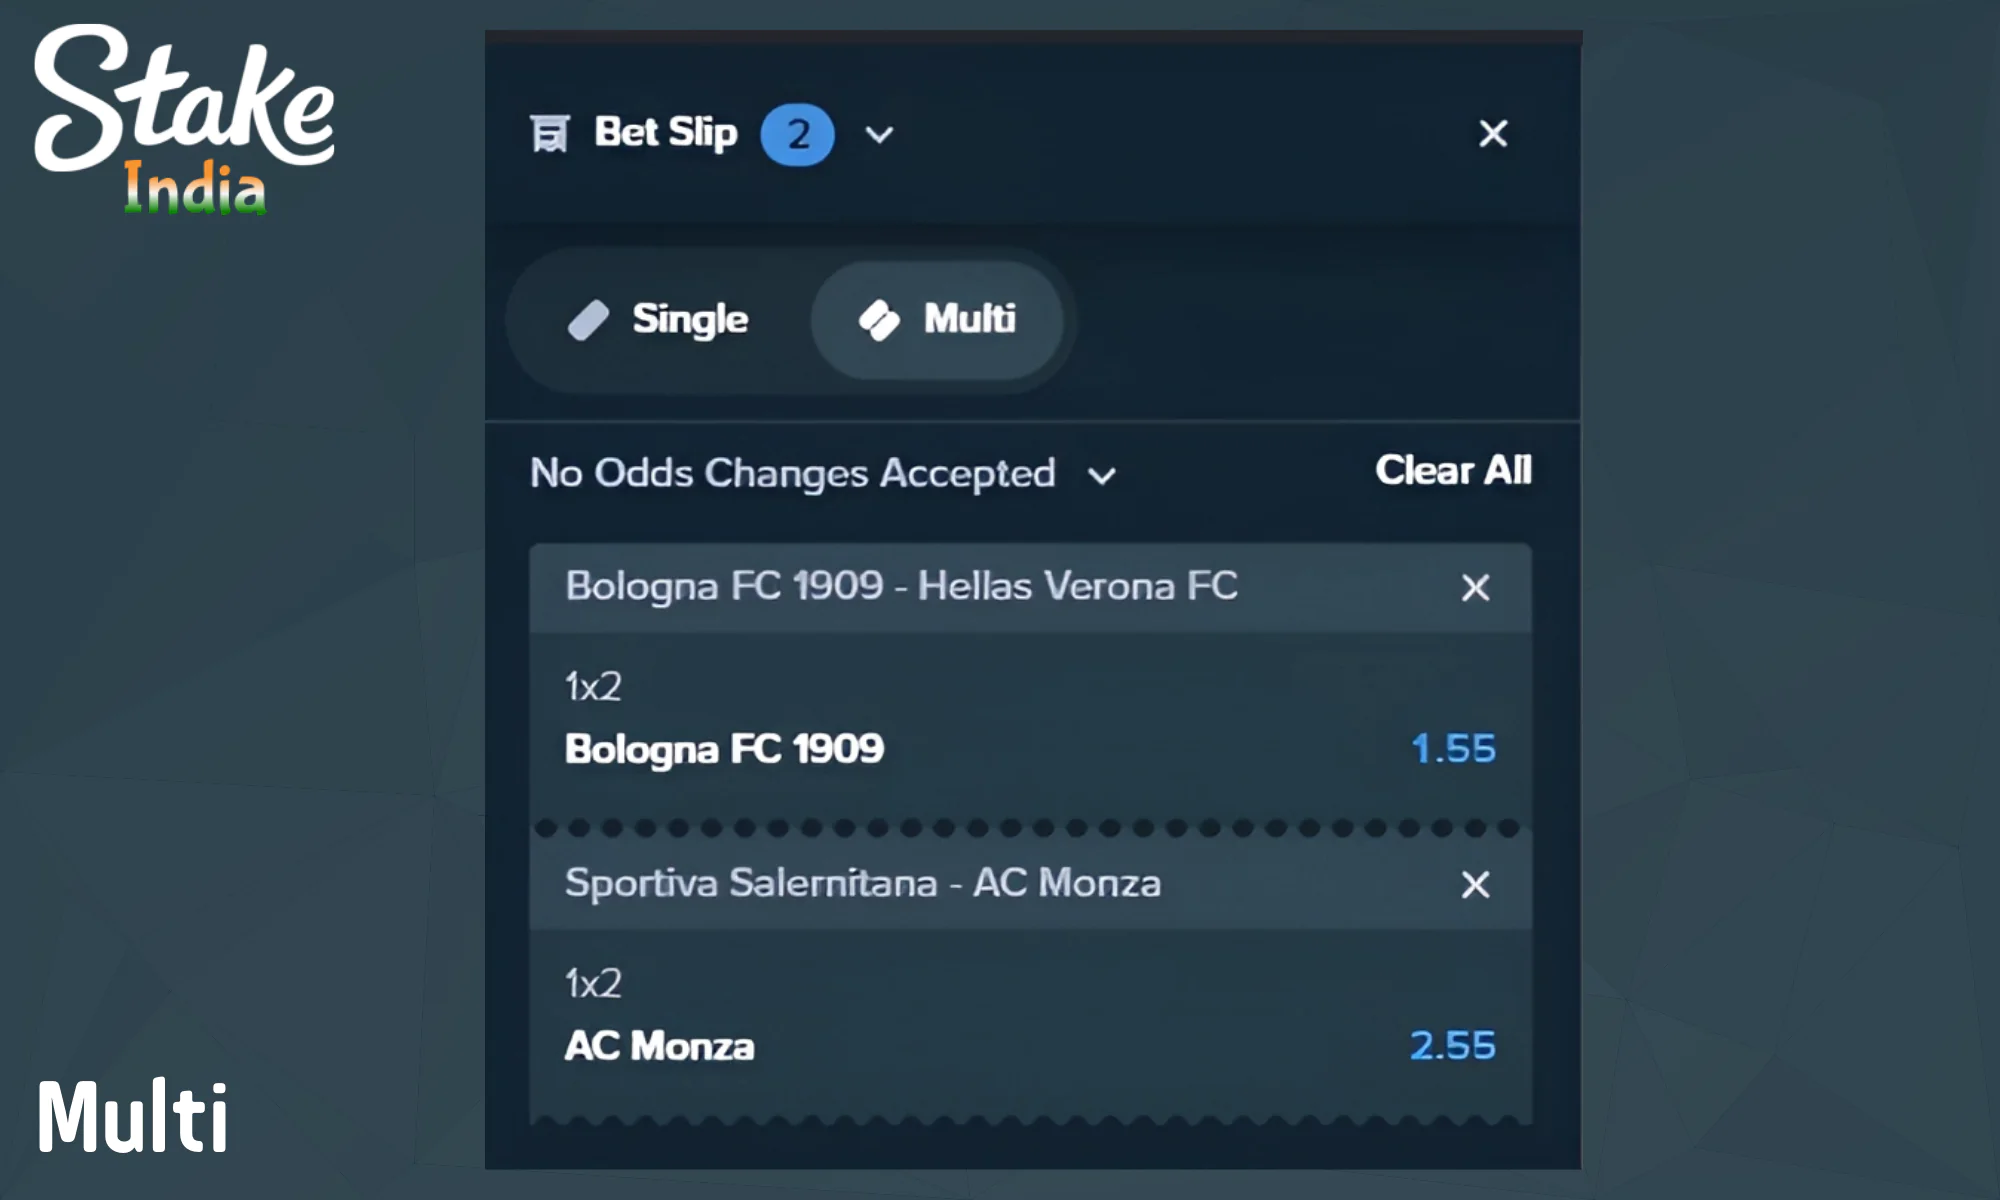 Stake allows you to select up to 25 matches and add them to a betting coupon